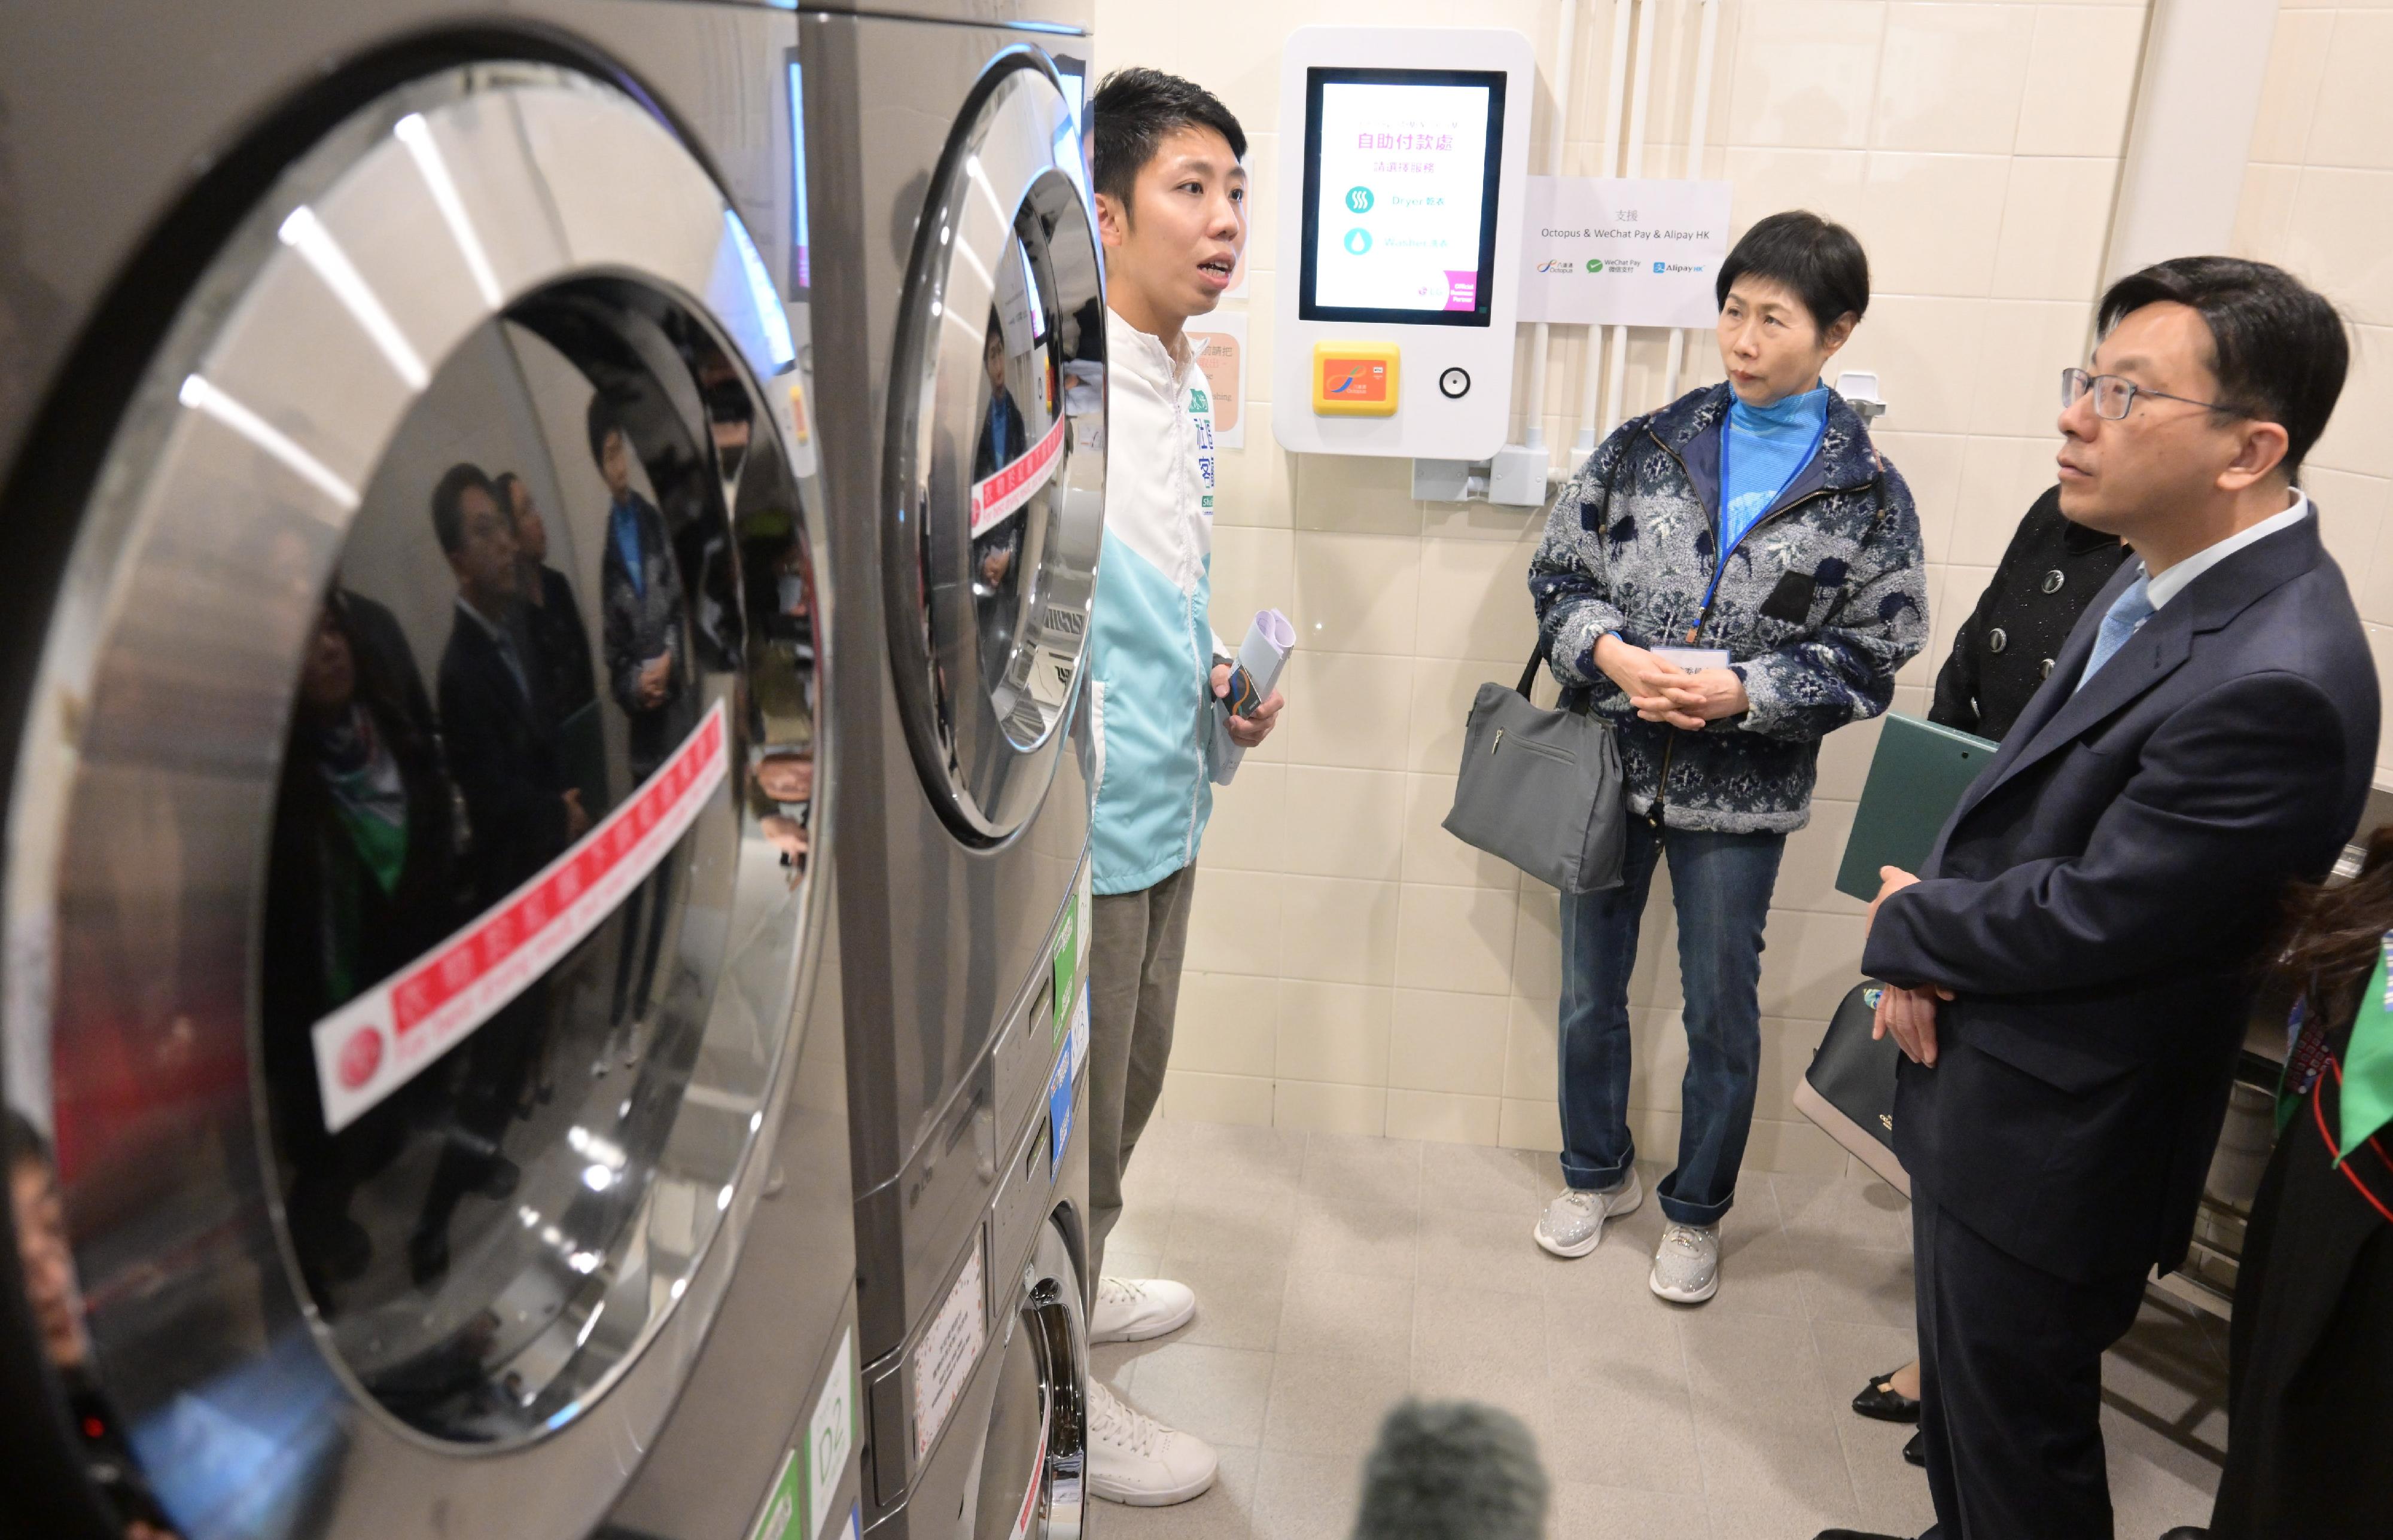 The fifth-term Commission on Poverty today (January 4) visited the first project under the Pilot Programme on Community Living Room, the Sham Shui Po Community Living Room. The Secretary for Labour and Welfare, Mr Chris Sun, also joined the visit. Photo shows Mr Sun (right) and members looking at the self-service laundry, which provides convenience to sub-divided unit households.